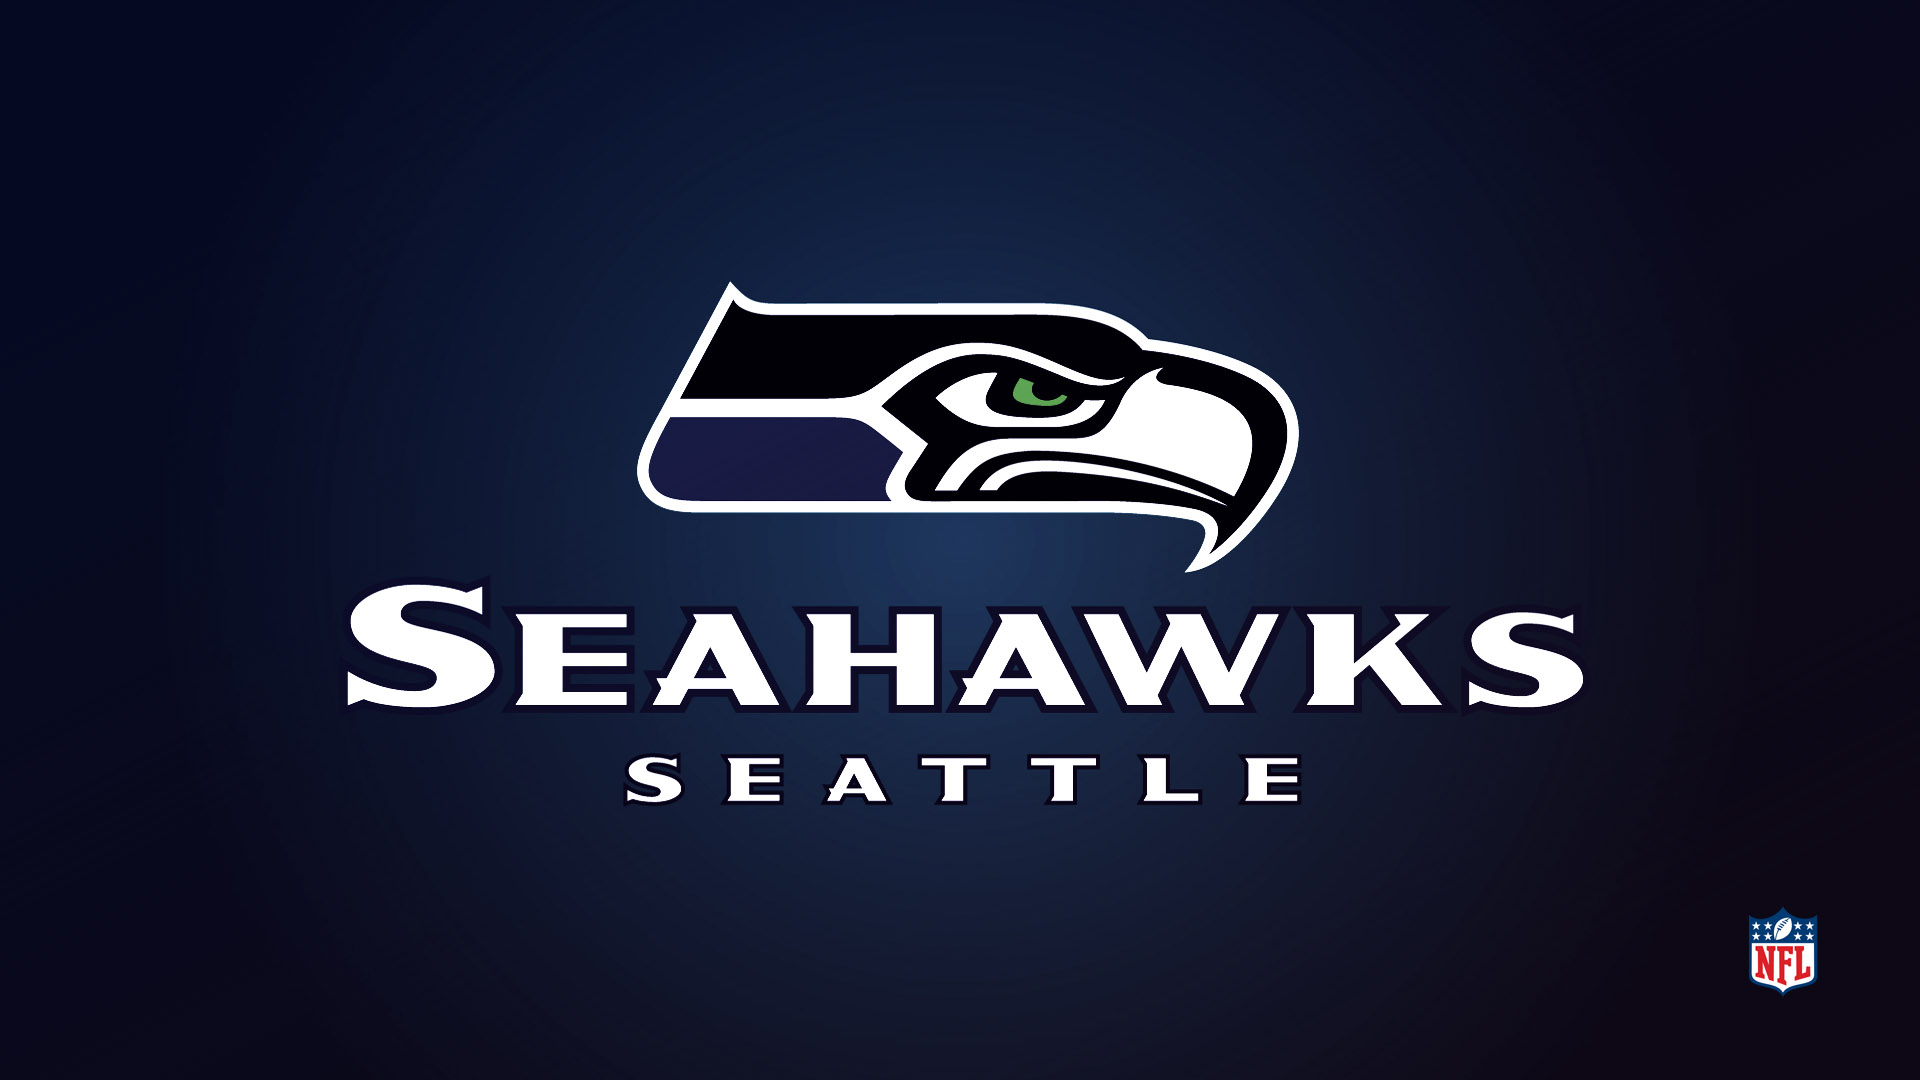 Wallpaper Details File Name Seattle Seahawks Uploaded By